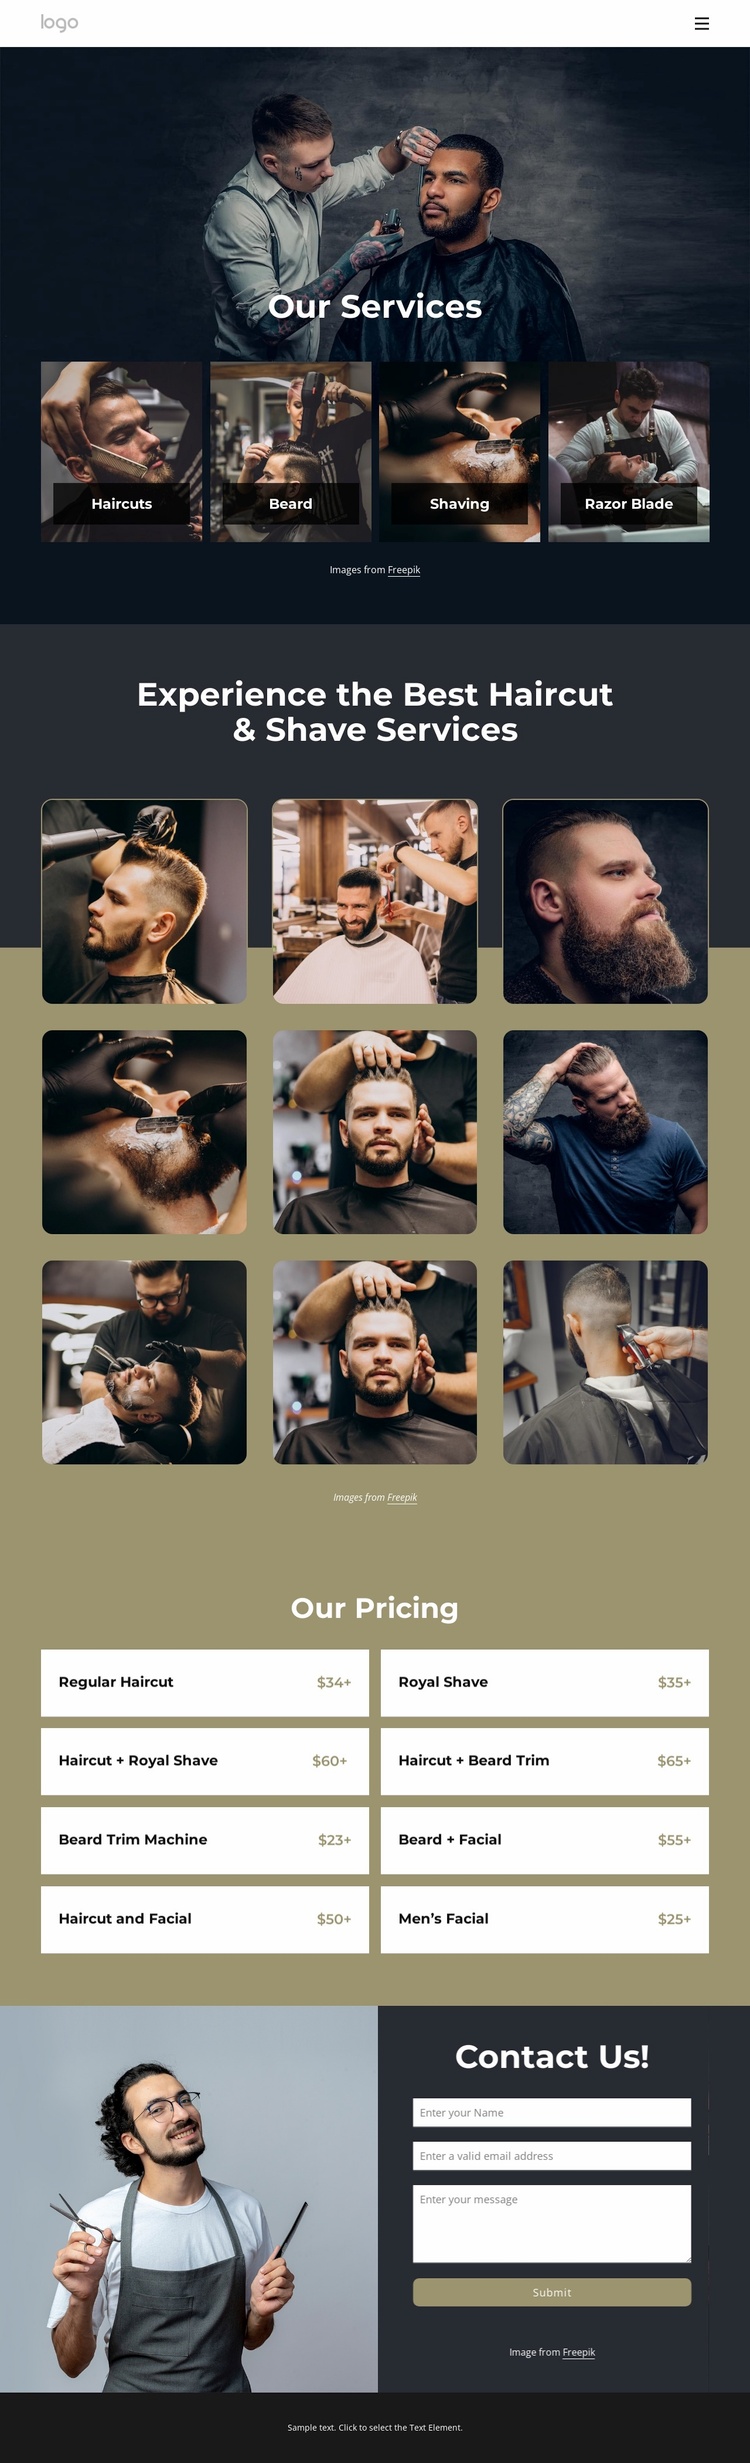 Best haircut and shave services Ecommerce Website Design